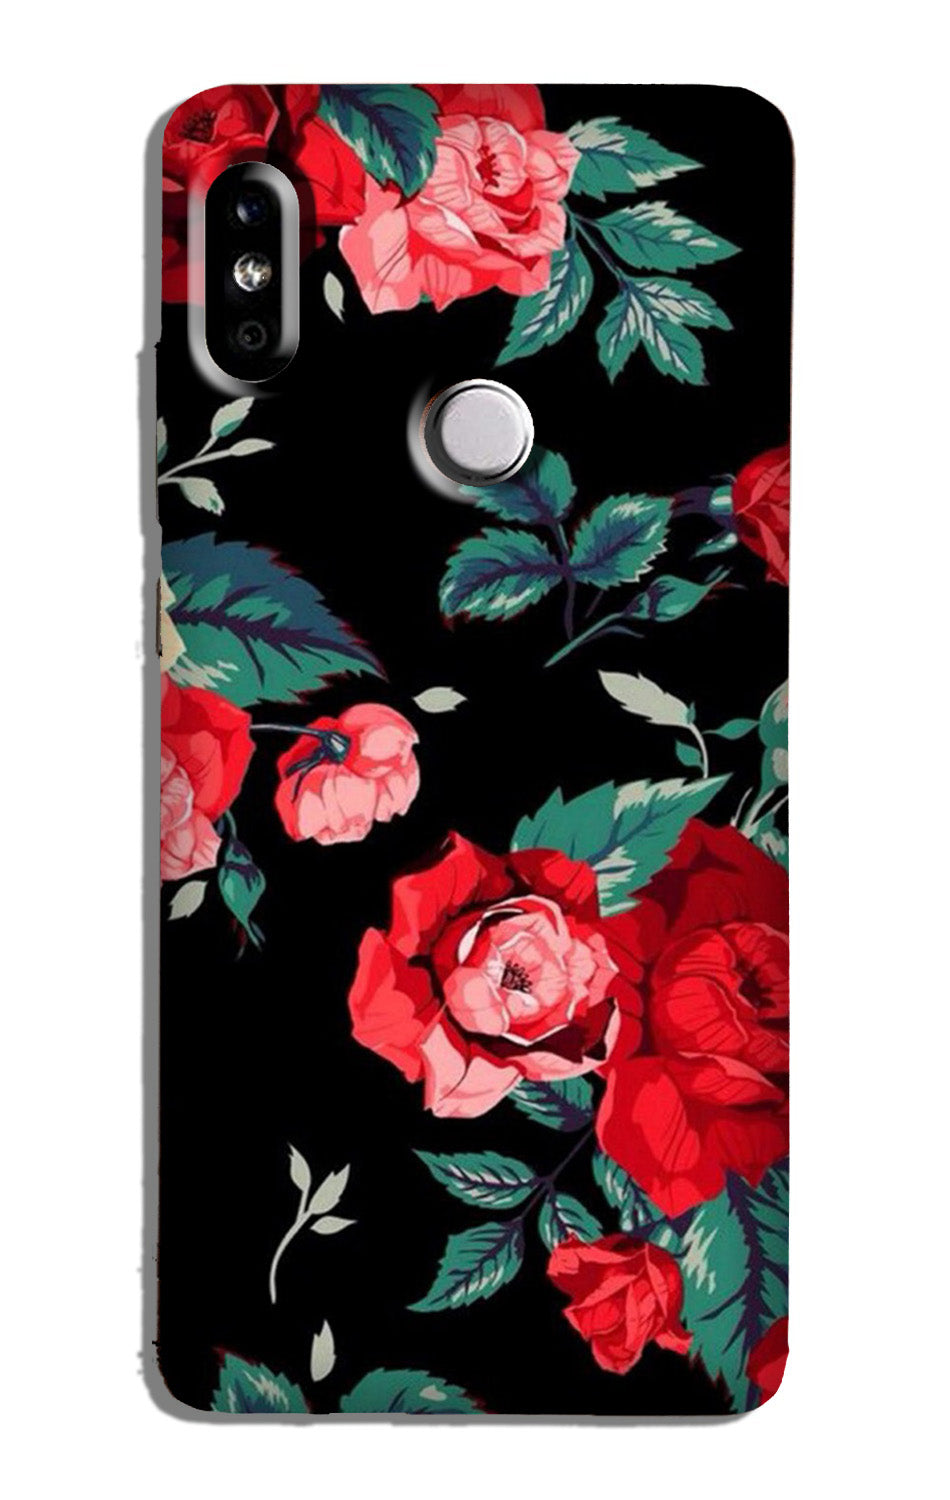 Red Rose Case for Redmi 6 Pro